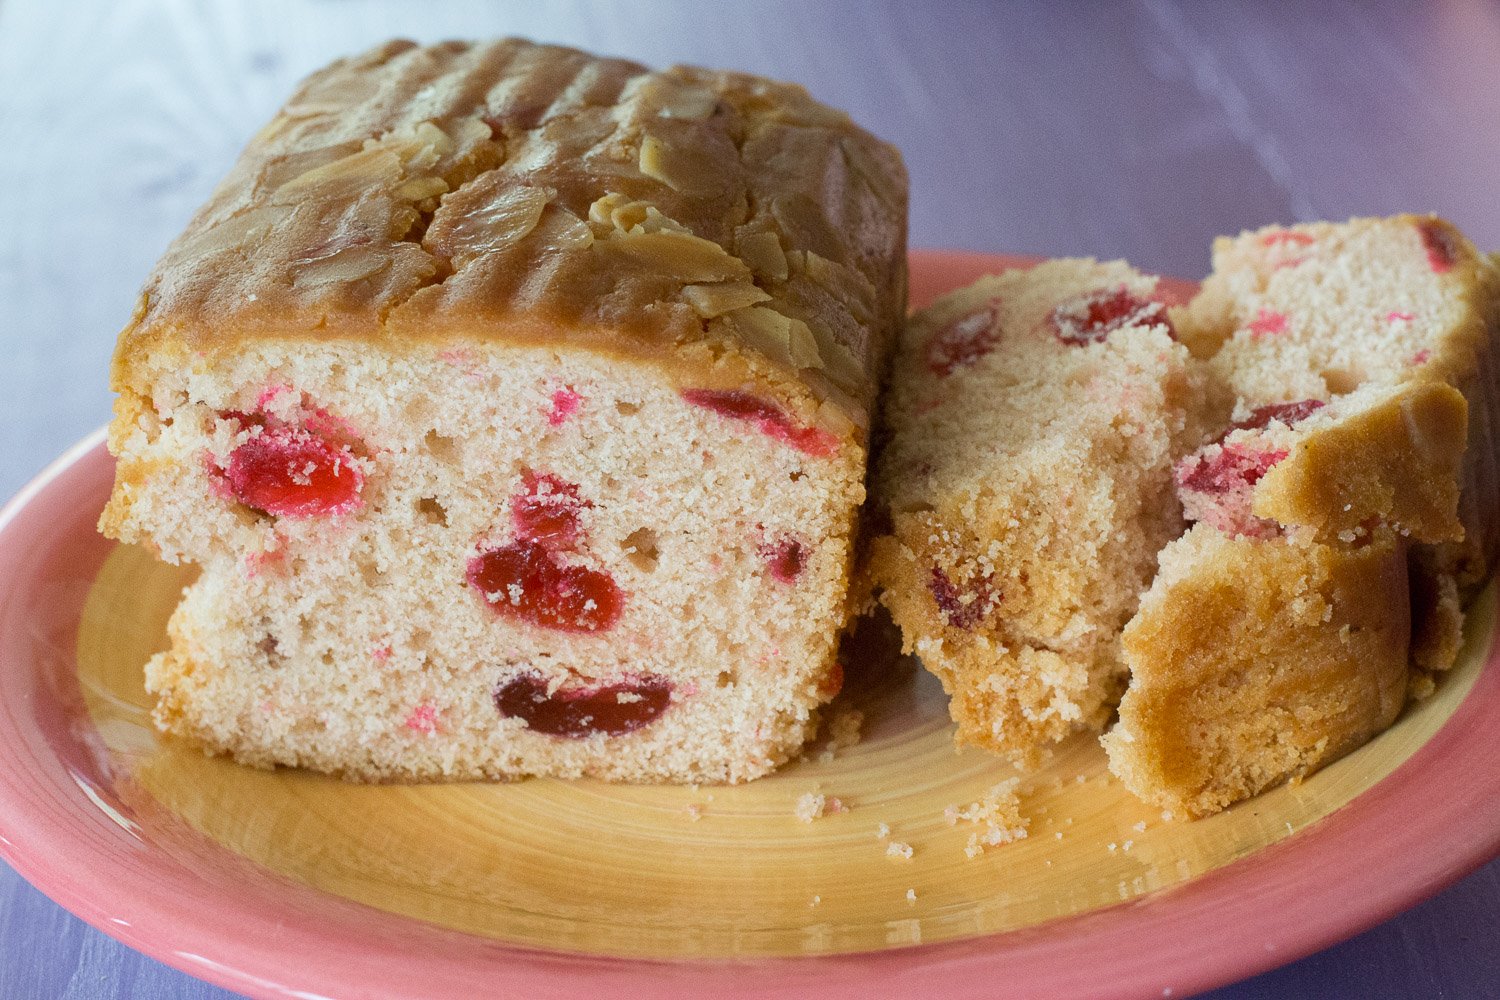 Vegan almond and cherry cake from the Riverbank Bakery in Norfolk